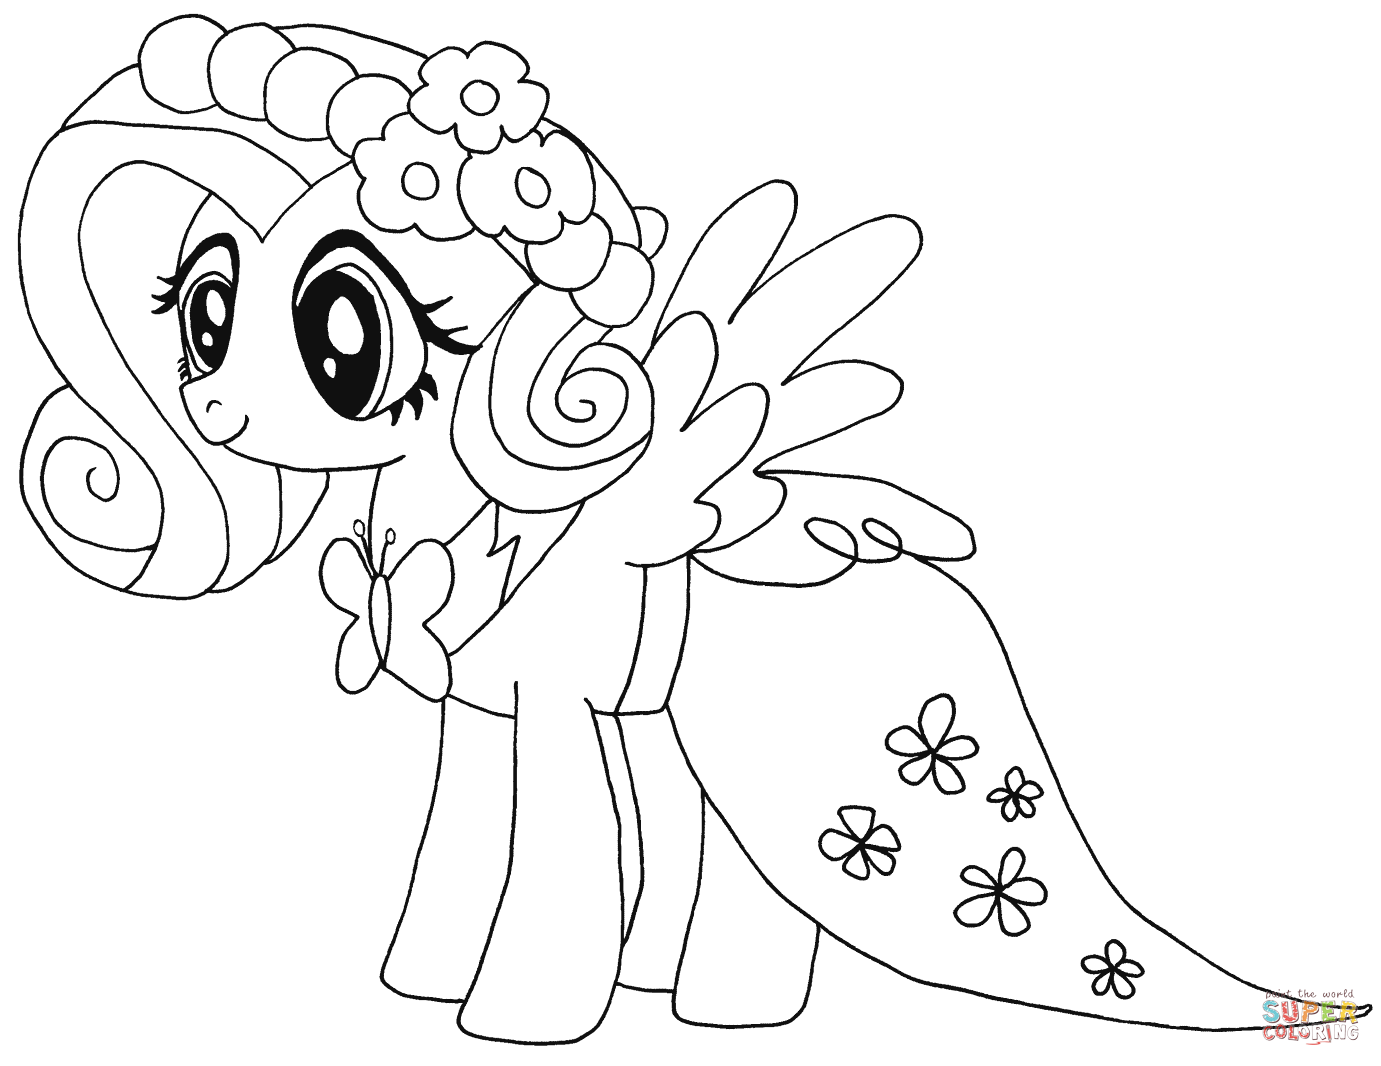 Fluttershy coloring page | Free Printable Coloring Pages